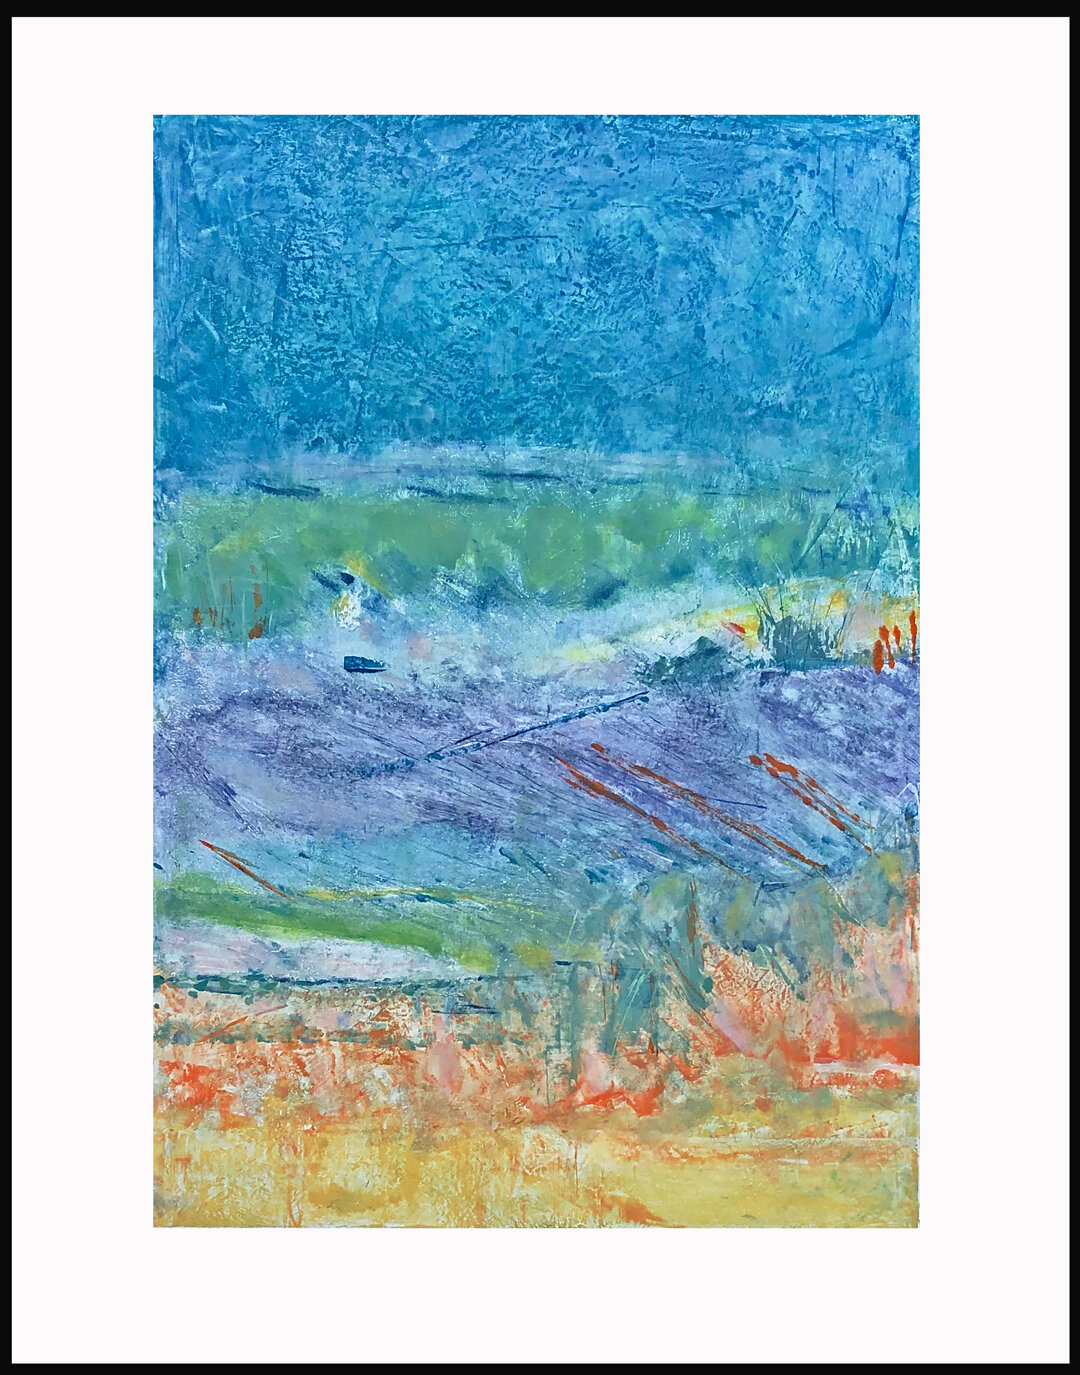   “The Wind in the Meadow”  Mixed Media Monoprint, matted 32 x 25 inches, 1/1   $275  